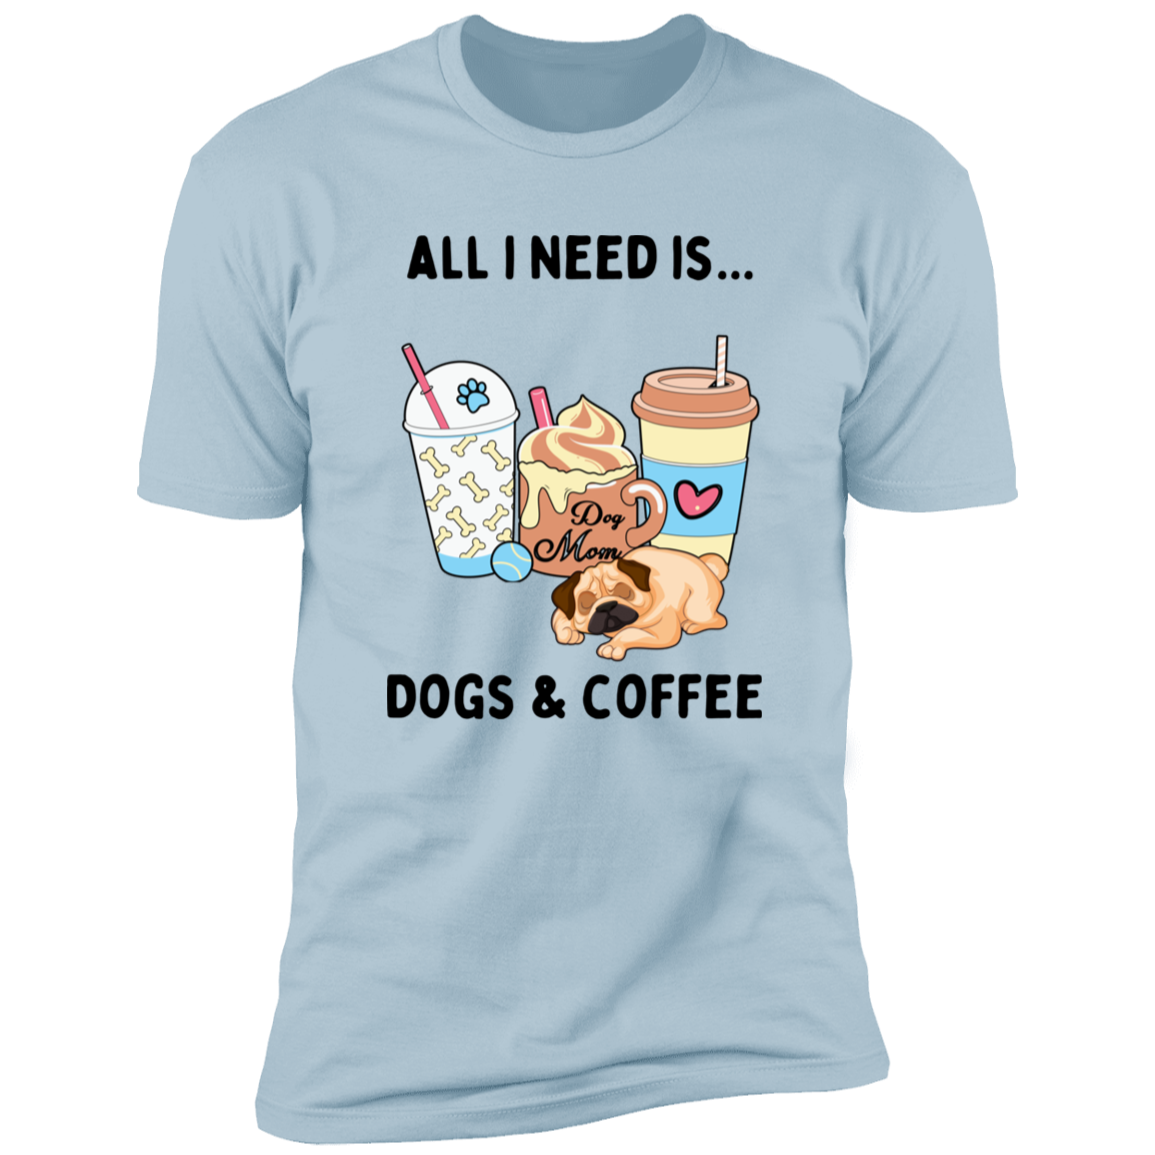 All I Need is Dogs and Coffee, Dog shirt for humas, in light blue